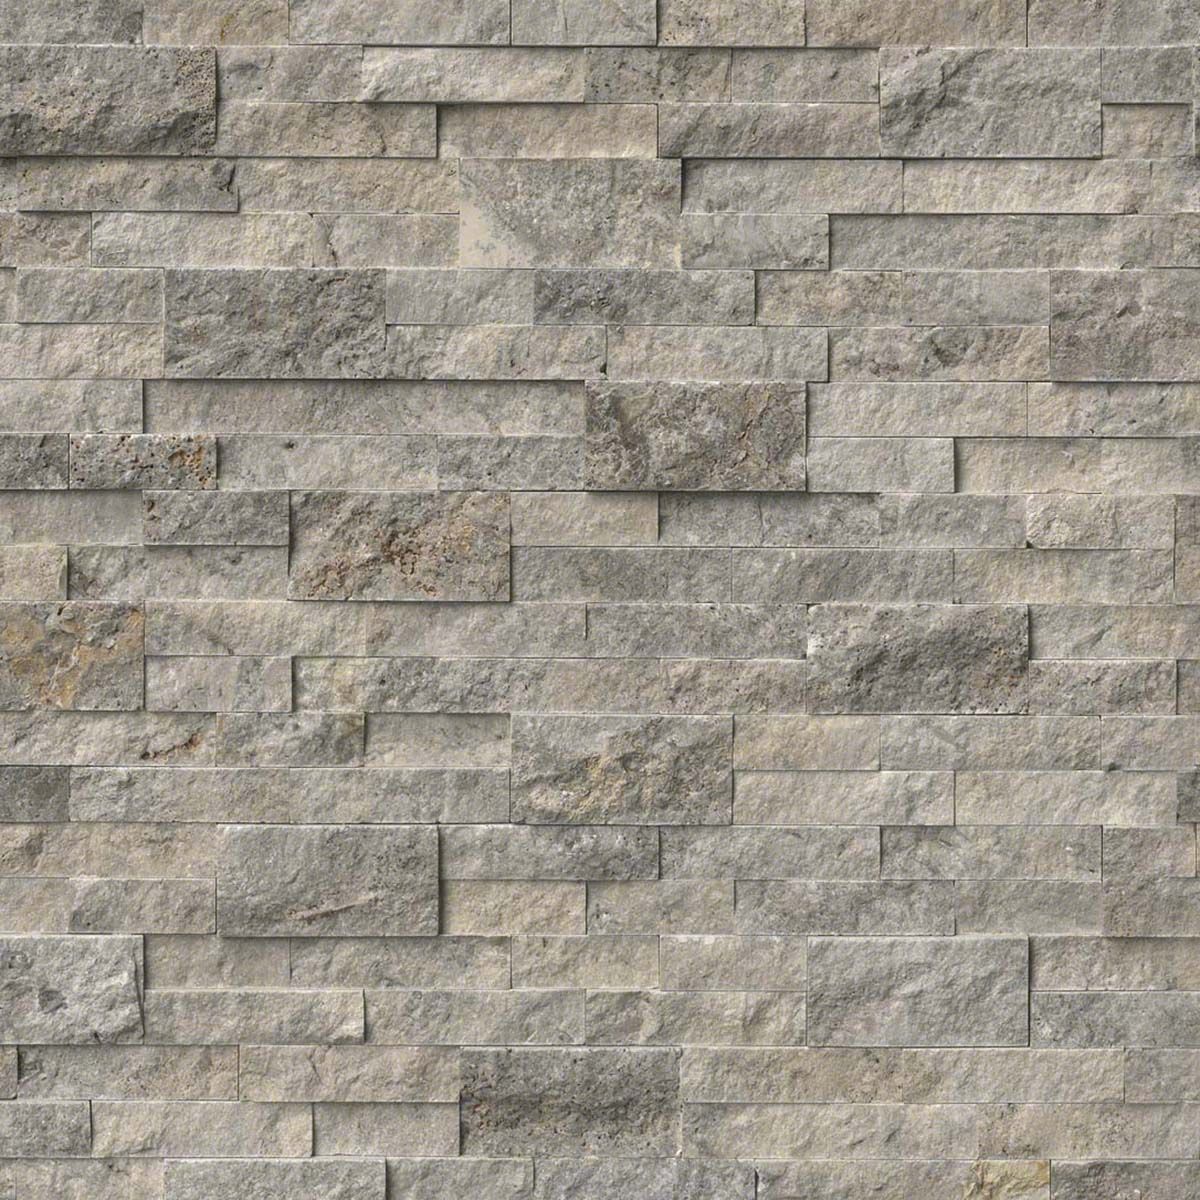 Stone Facade Fireplace New From Msi Stone Have Sample Primarily Gray with some Beige